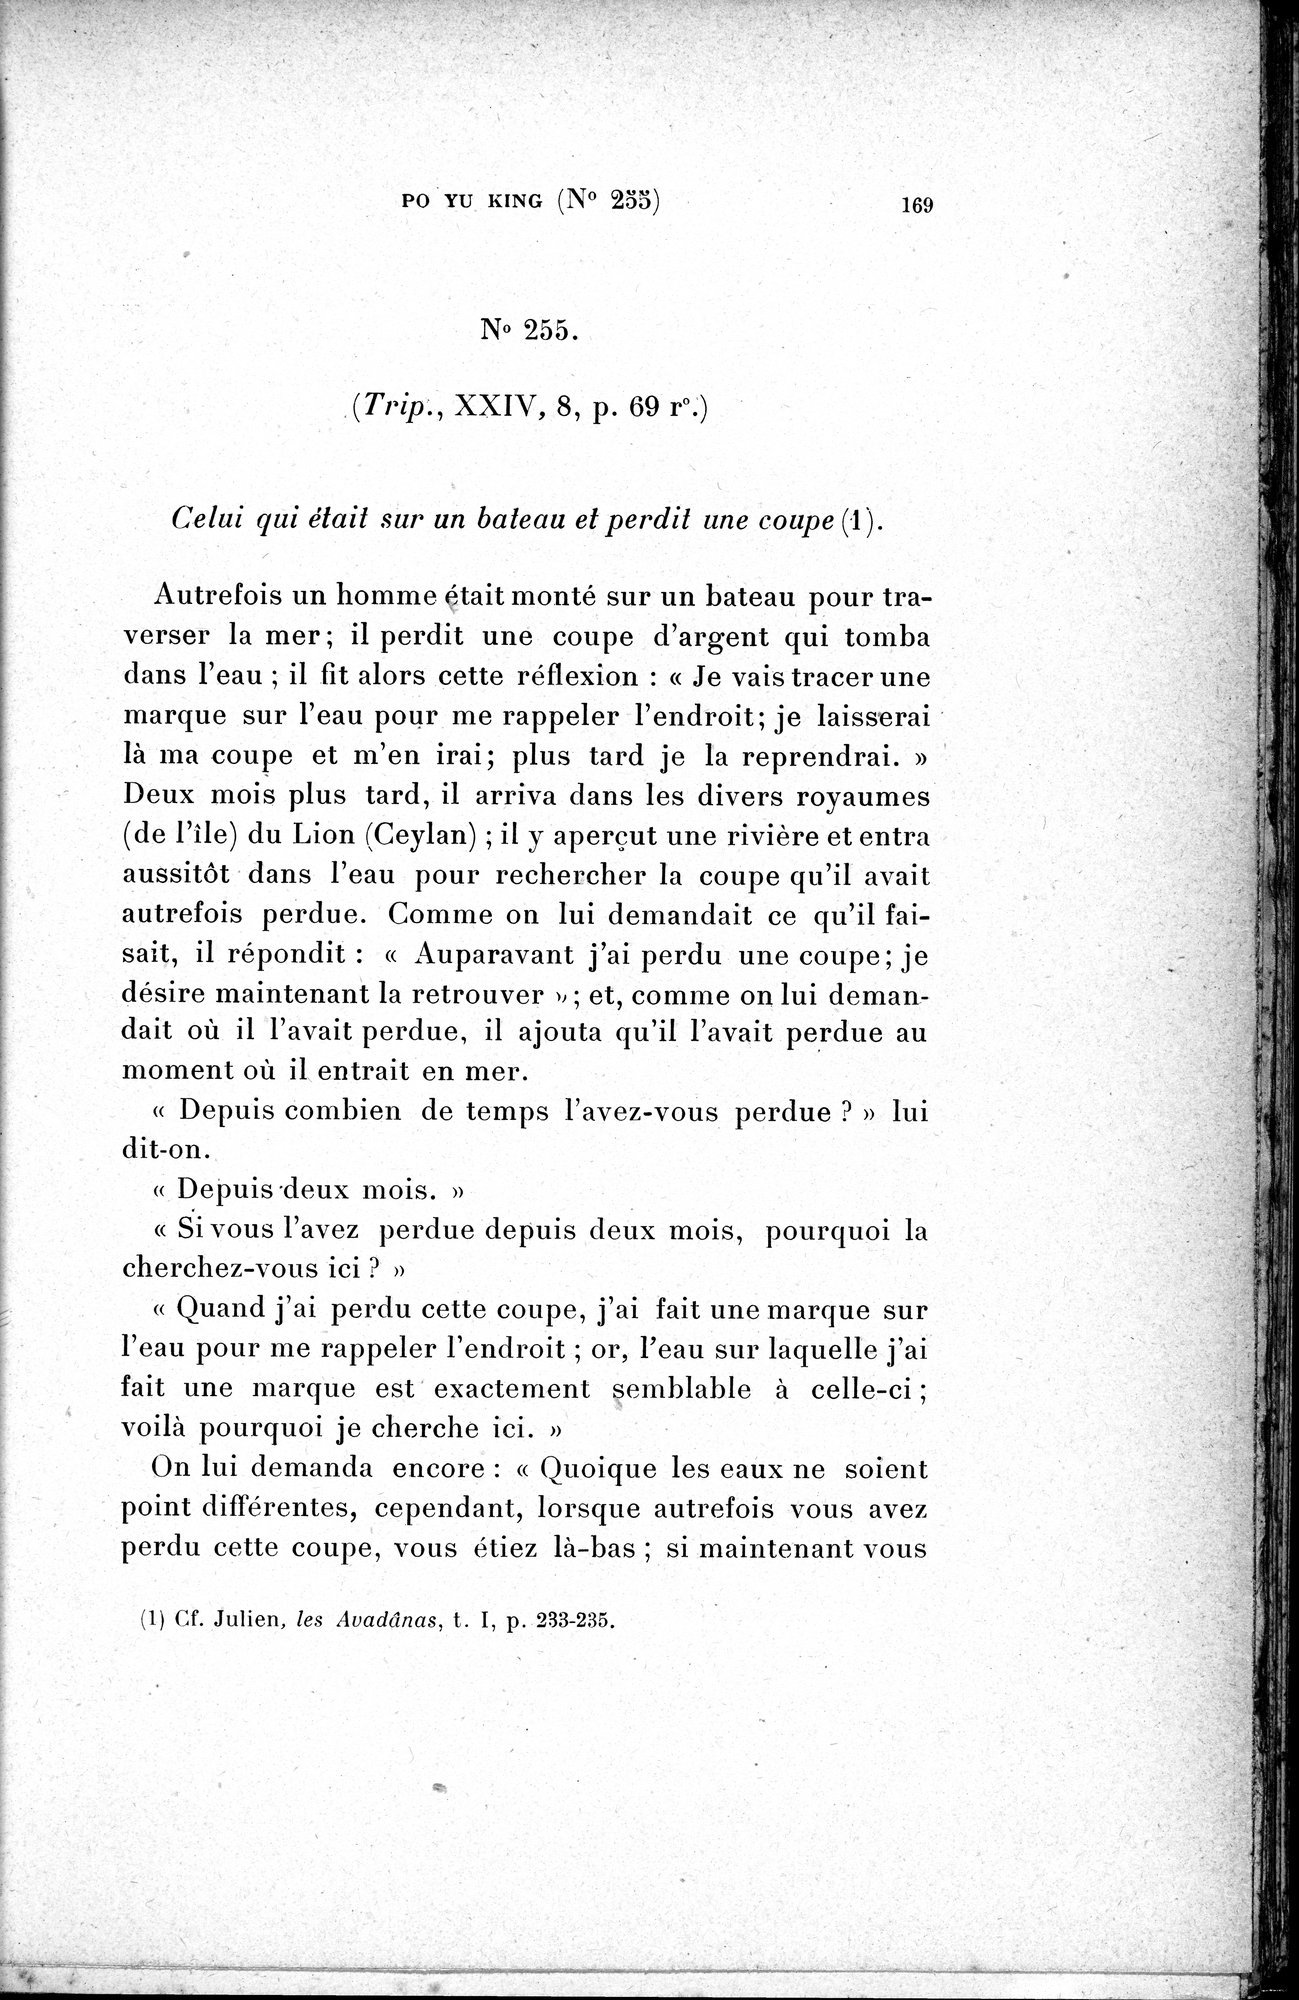 Cinq Cents Contes et Apologues : vol.2 / Page 183 (Grayscale High Resolution Image)